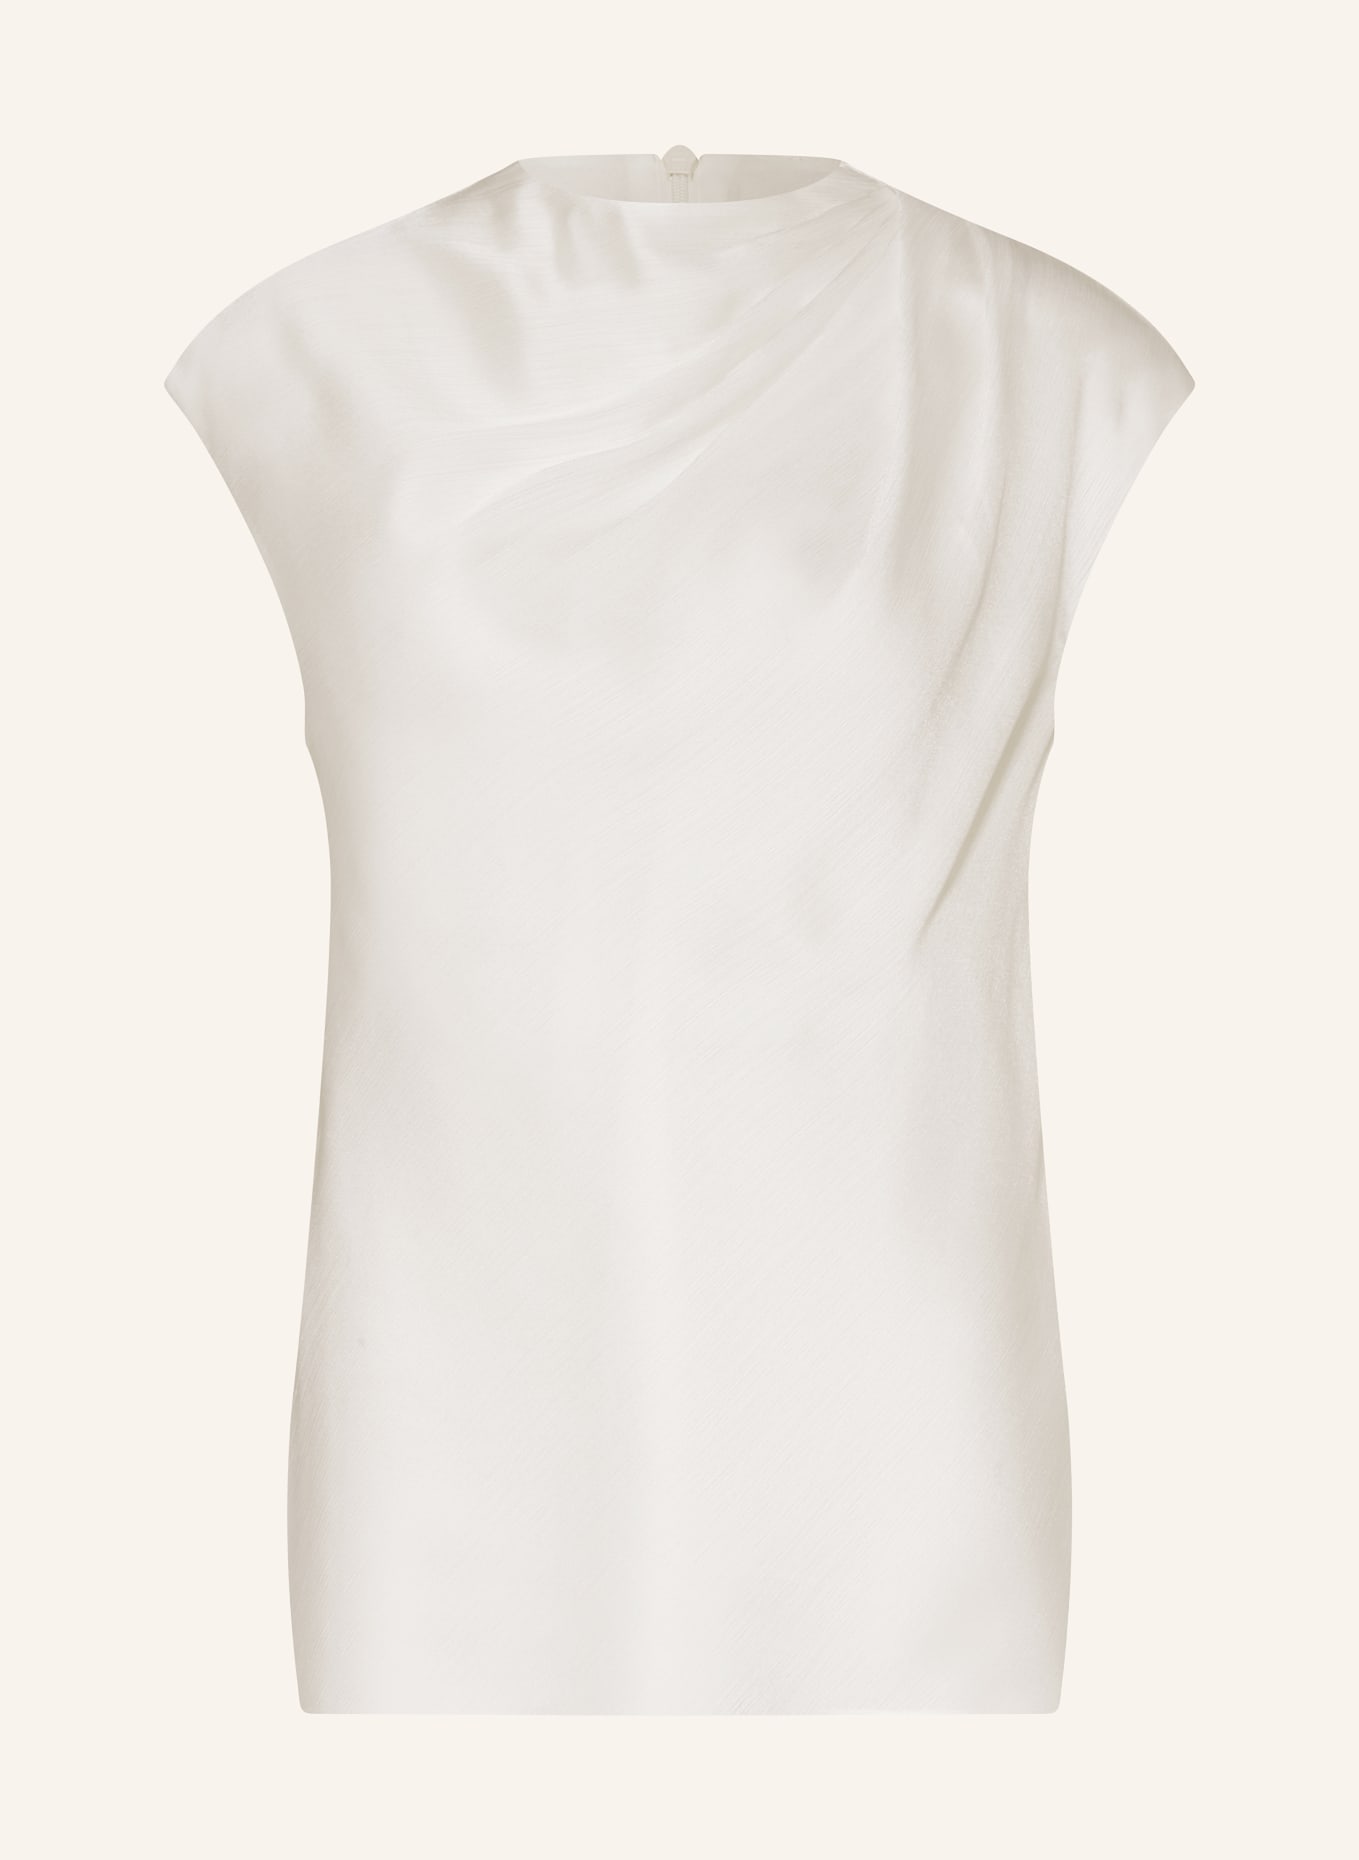 TED BAKER Blouse top MISRINA, Color: WHITE (Image 1)